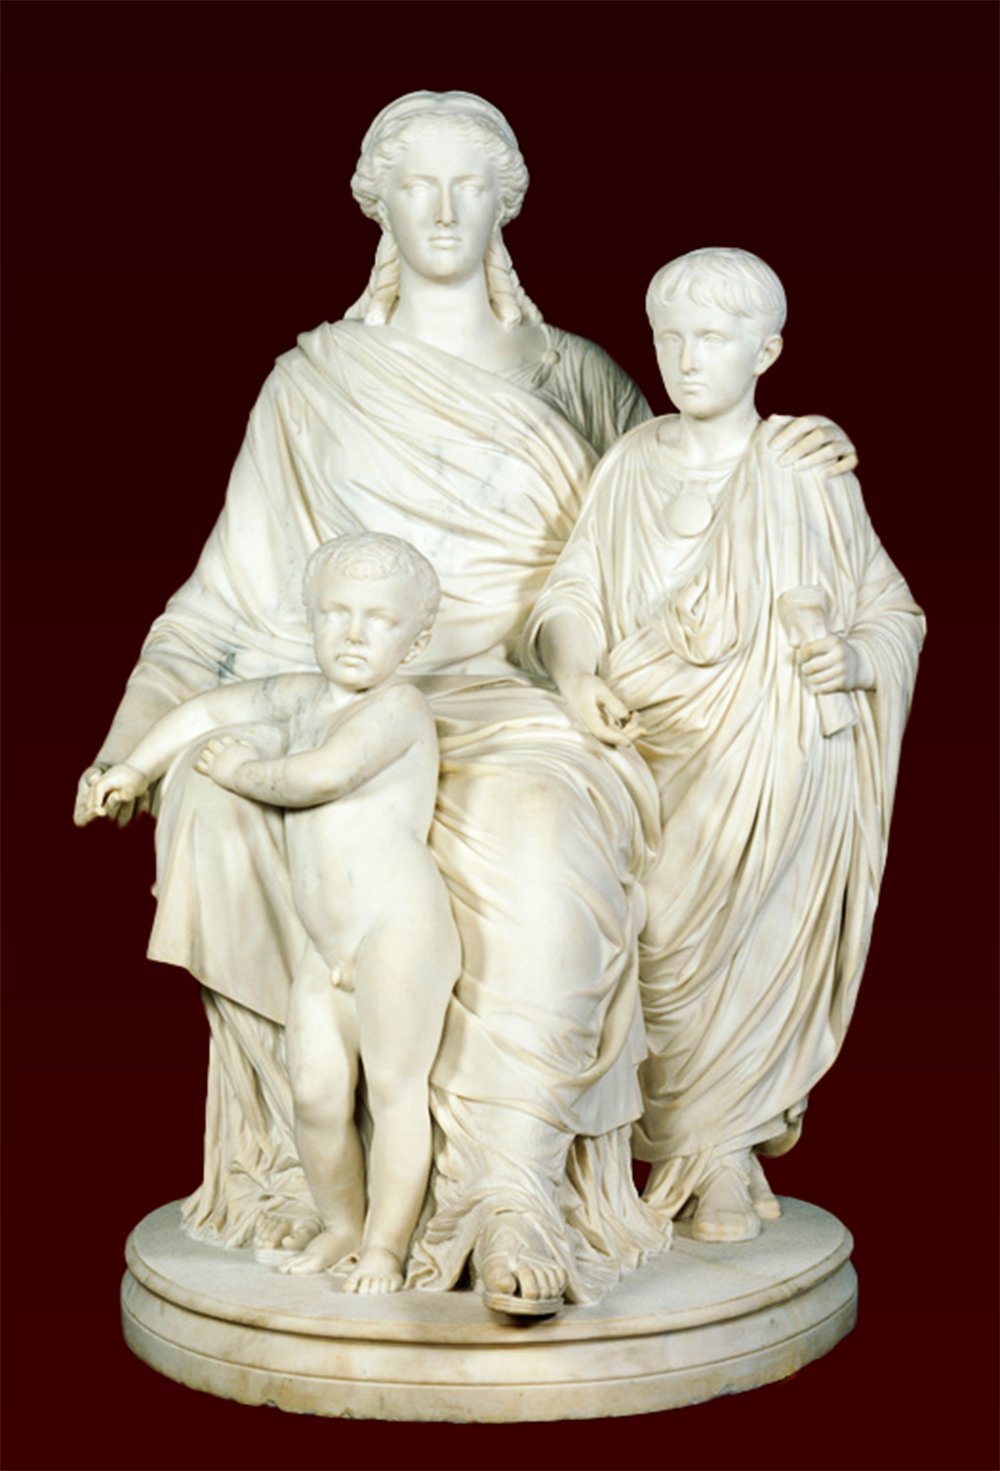 A white marble statue of three figures in robes on a round base The central figure is Cornelia Africanus, Mother of the Gracchi, figure on the left is a child Gaius Gracchus, Tiberius Gracchus is on the right is standing and holding a scroll, and the background is dark red.